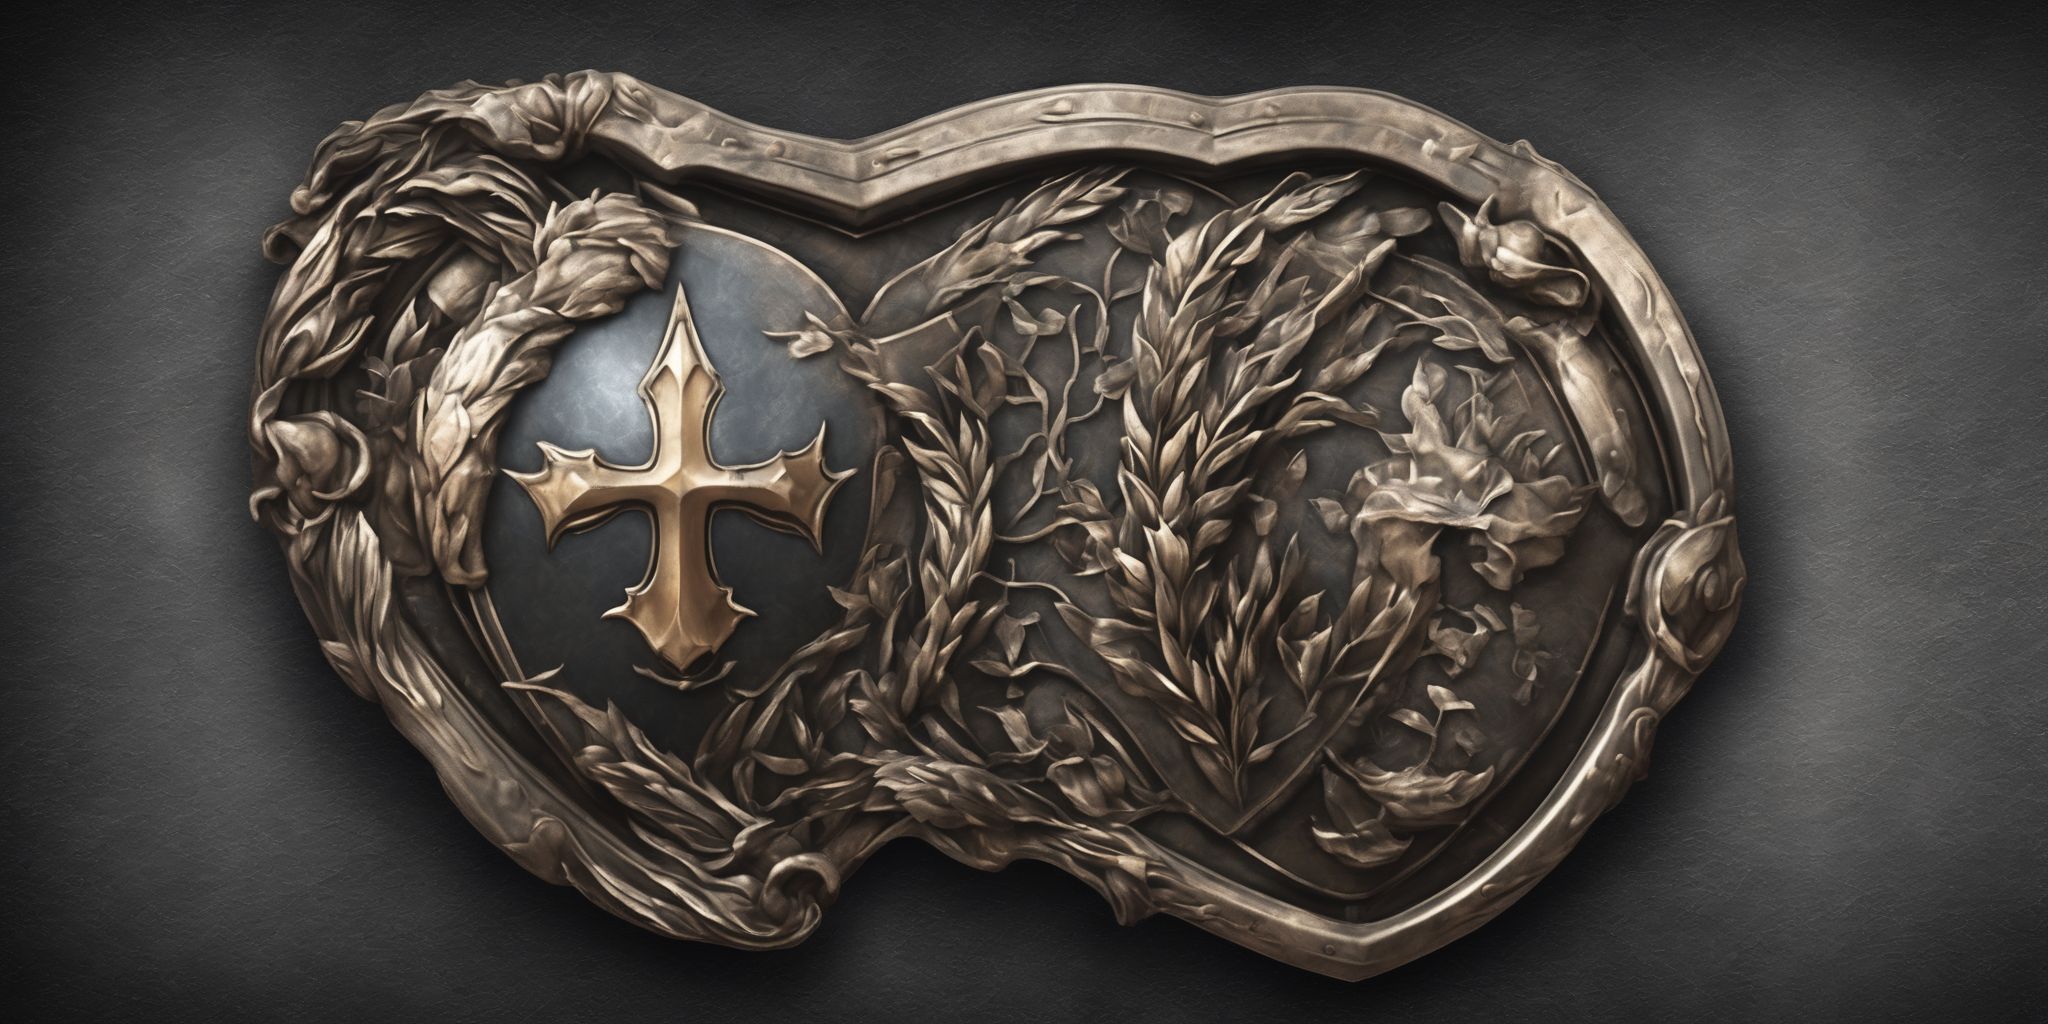 Principles shield  in realistic, photographic style